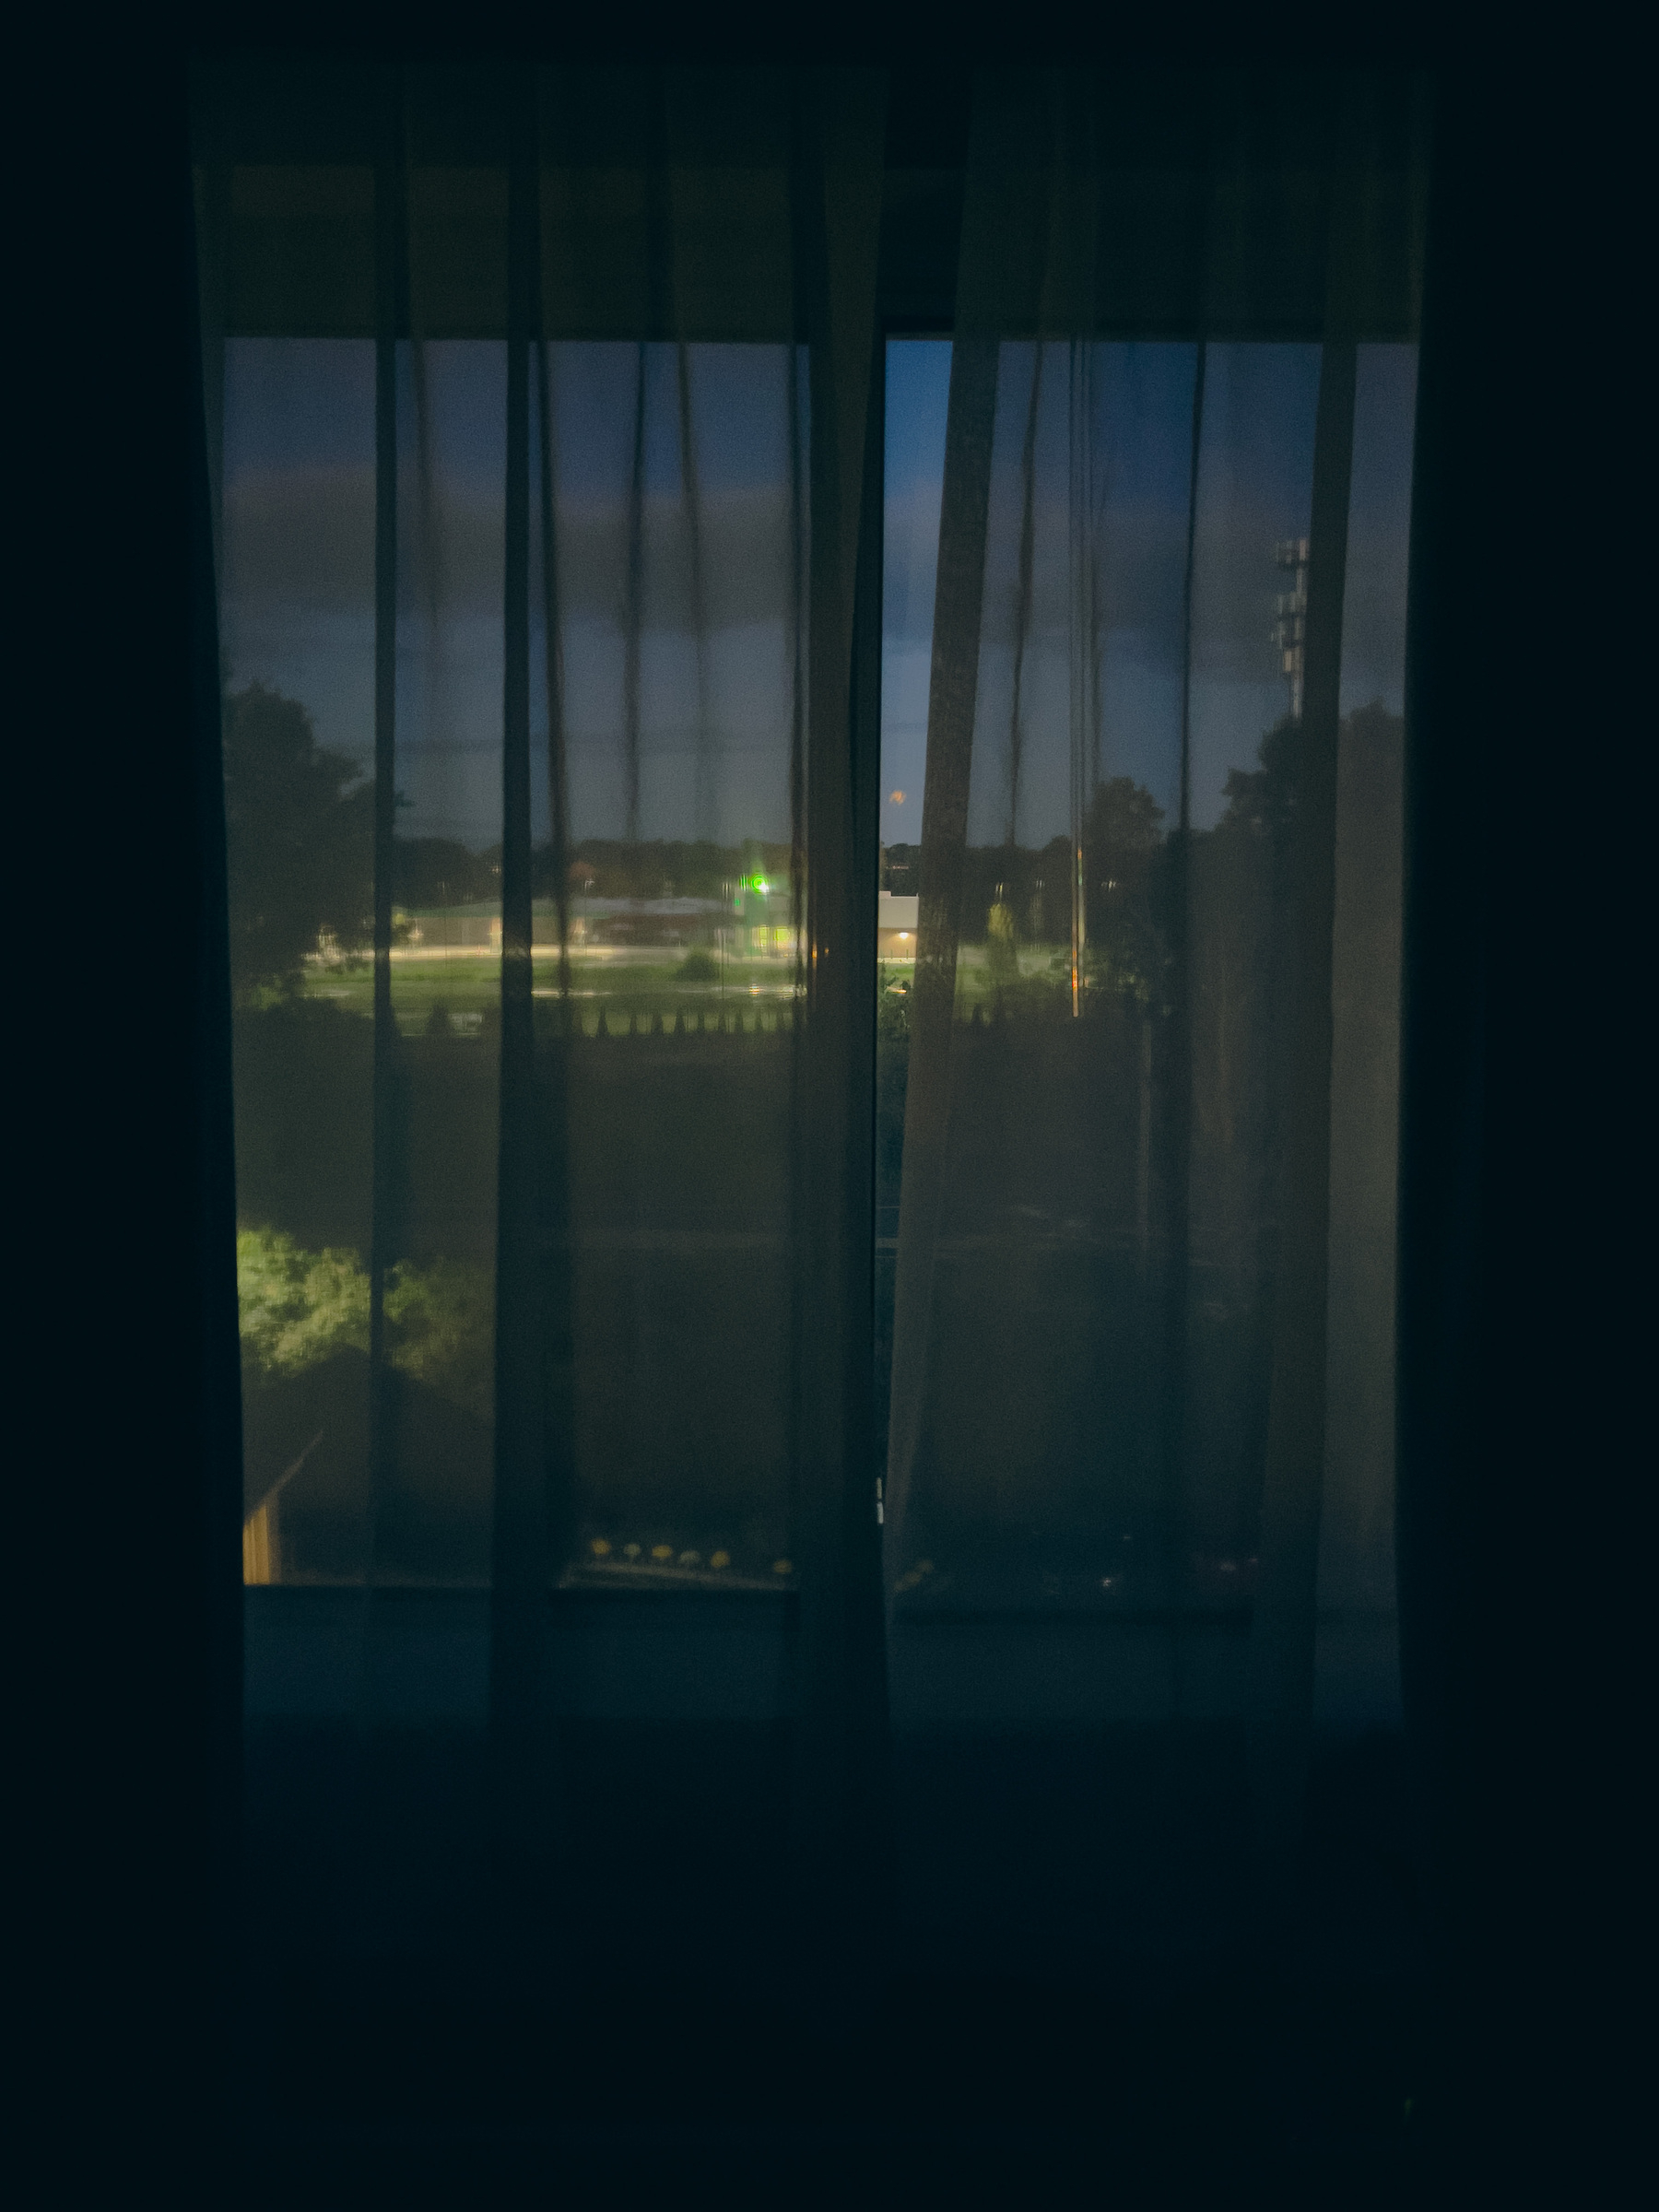 Early morning view through sheer curtains in a hotel room.